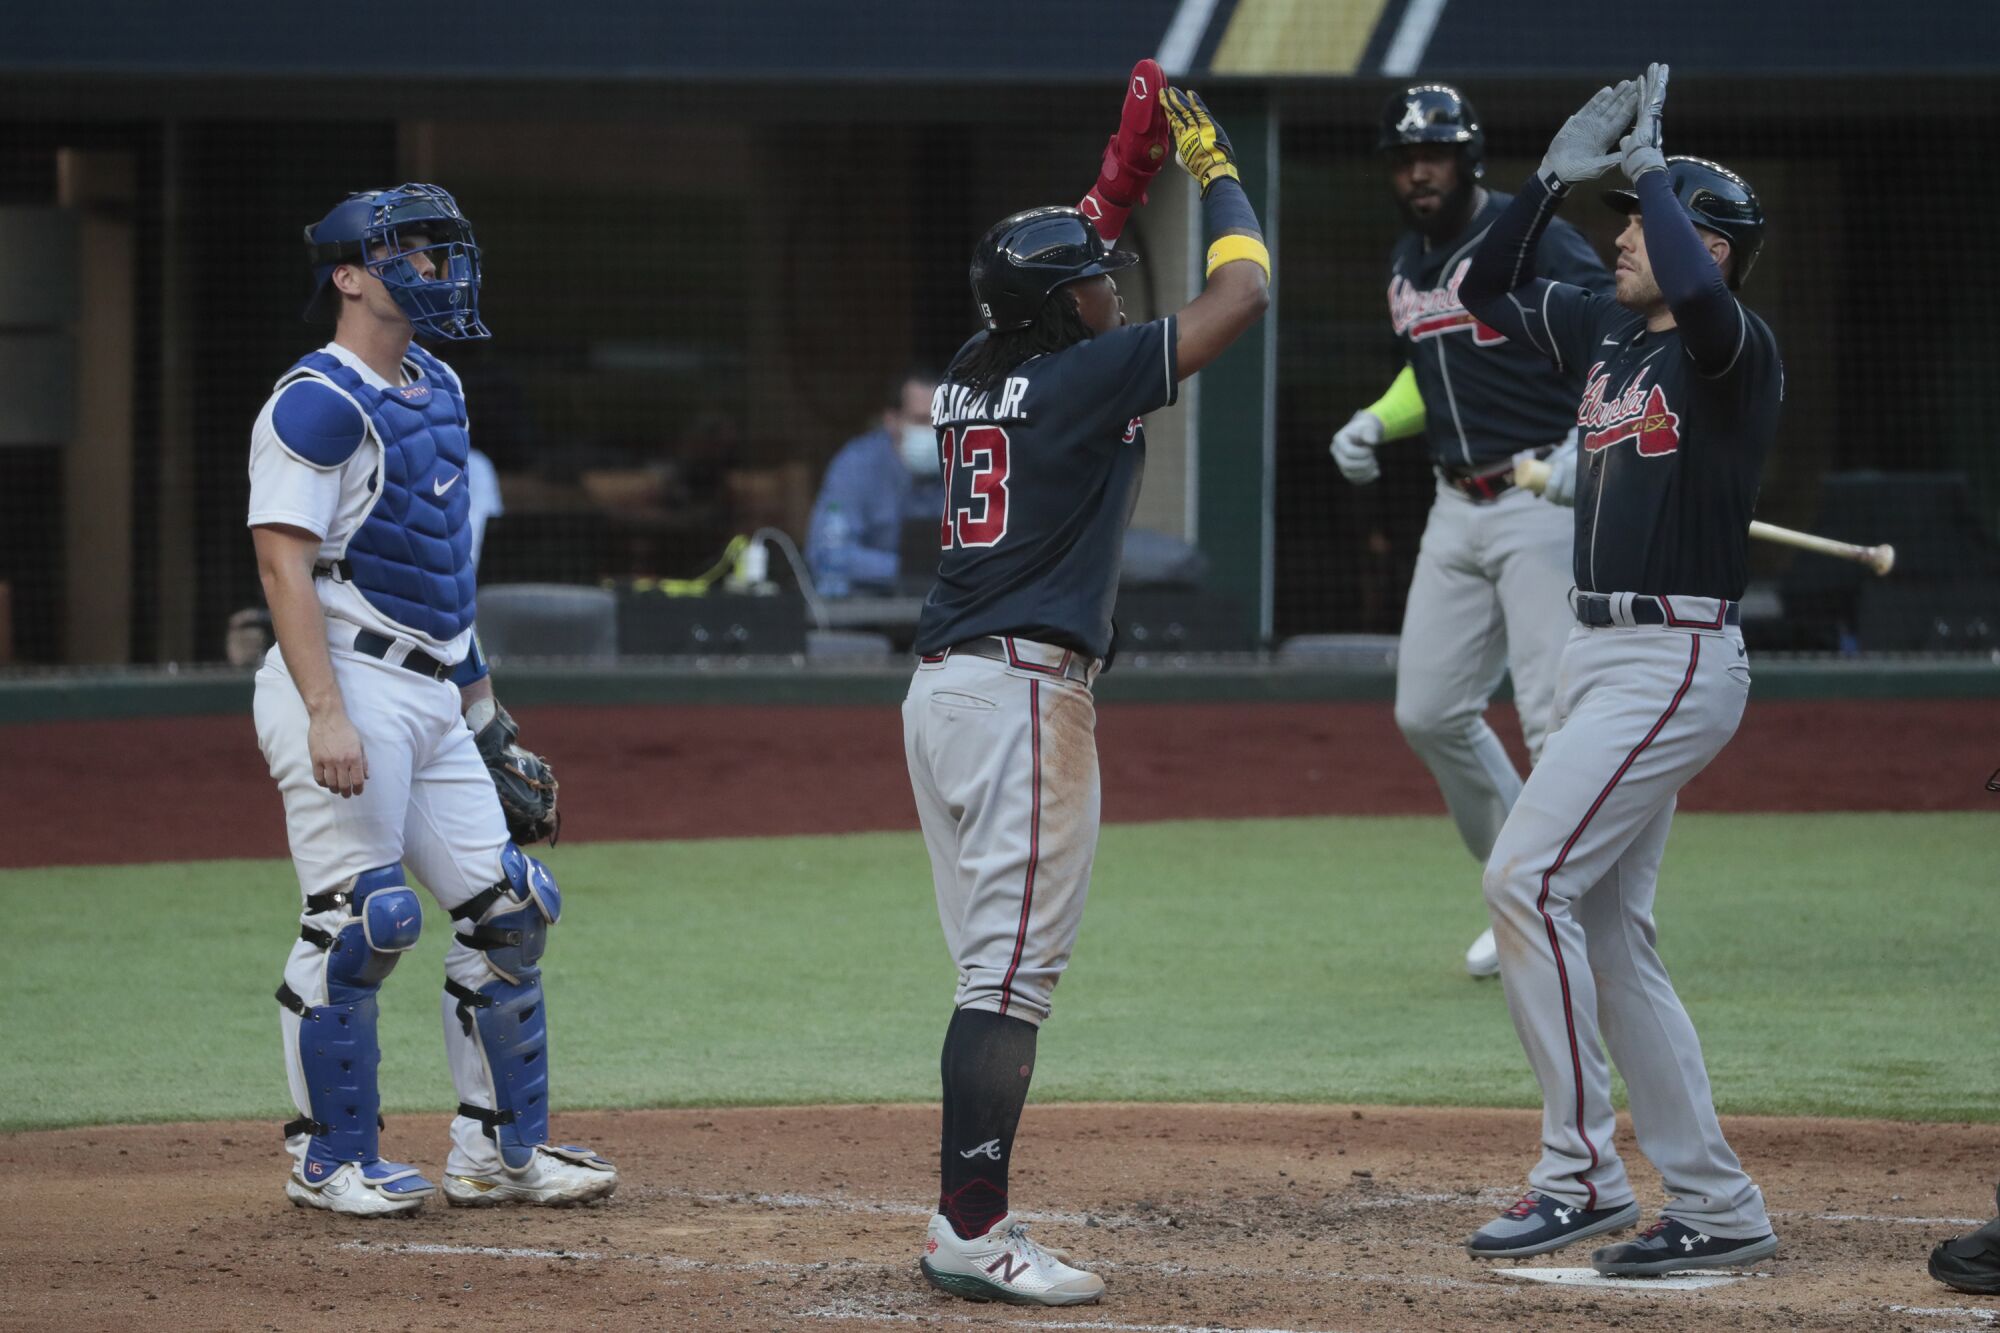 Atlanta's Freddie Freeman, right, celebrates with teammate Ronald Acuna Jr. after hitting a two-run home run.